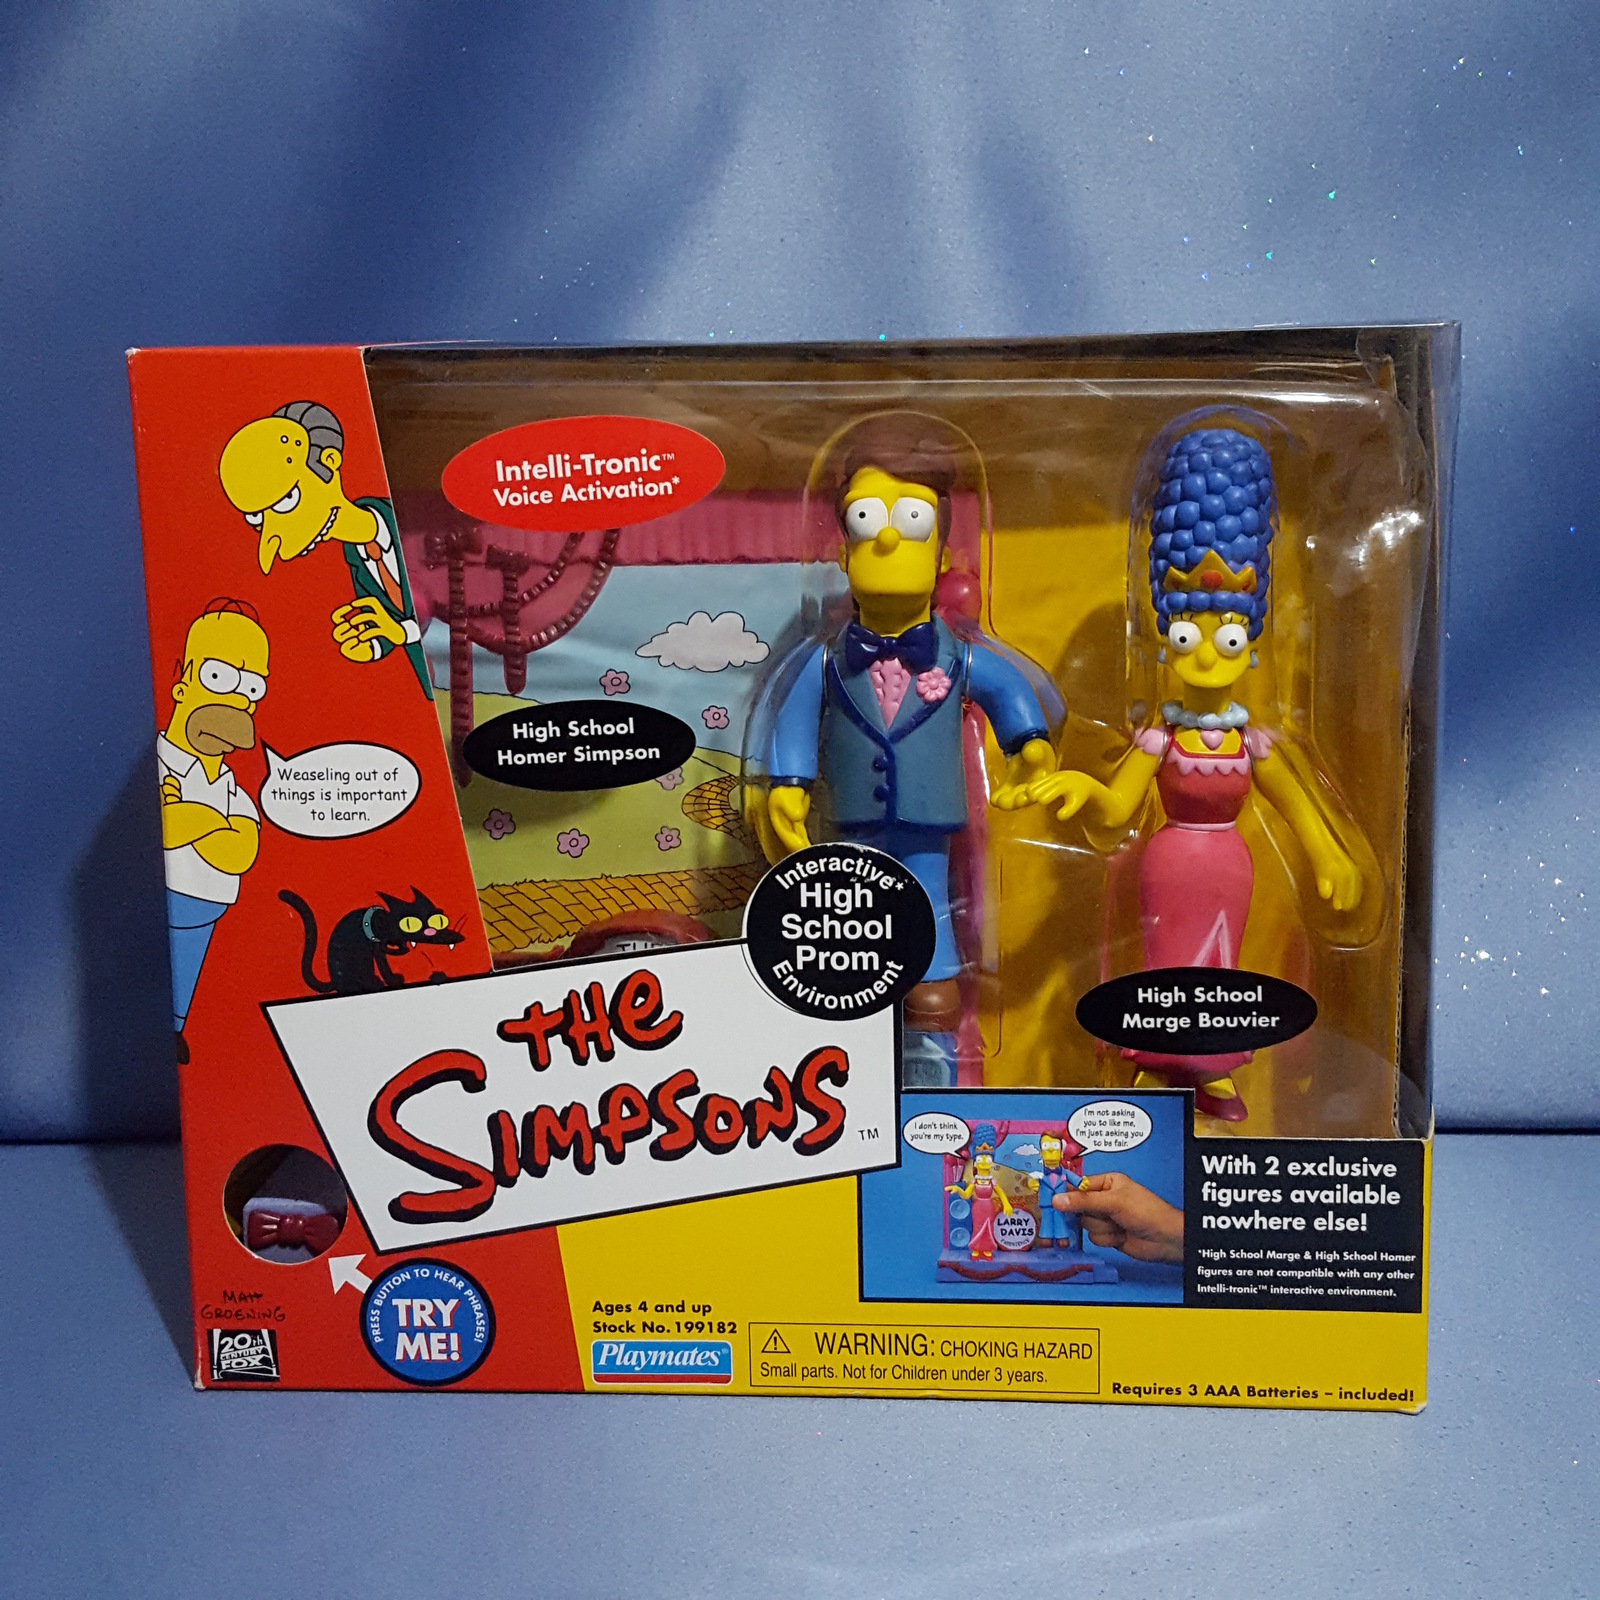 The Simpsons - Interactive HS Prom Environment with Homer Simpson and Marge by P - $35.00